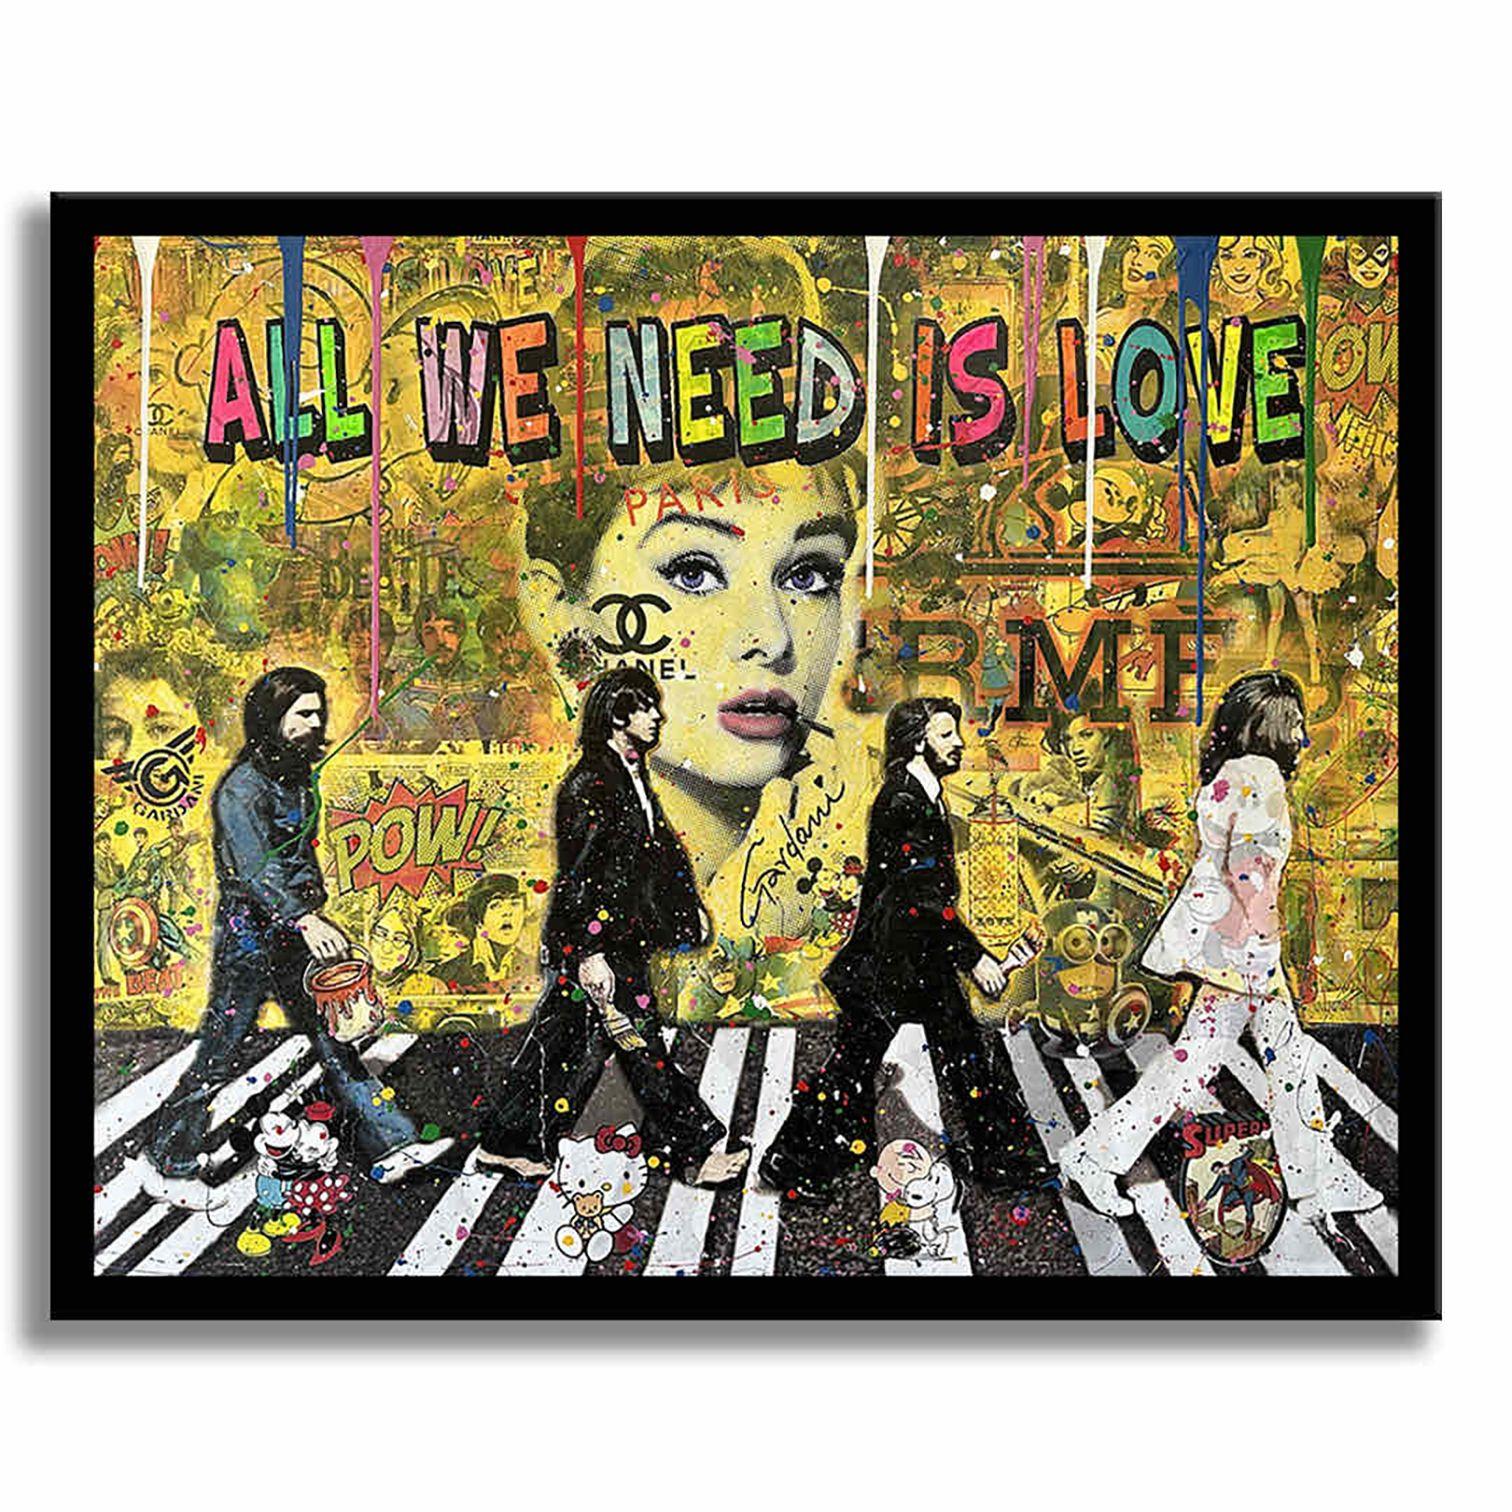 Each morning Beatles â€“ Original Painting on canvas, Painting, Acrylic on Canva For Sale 3